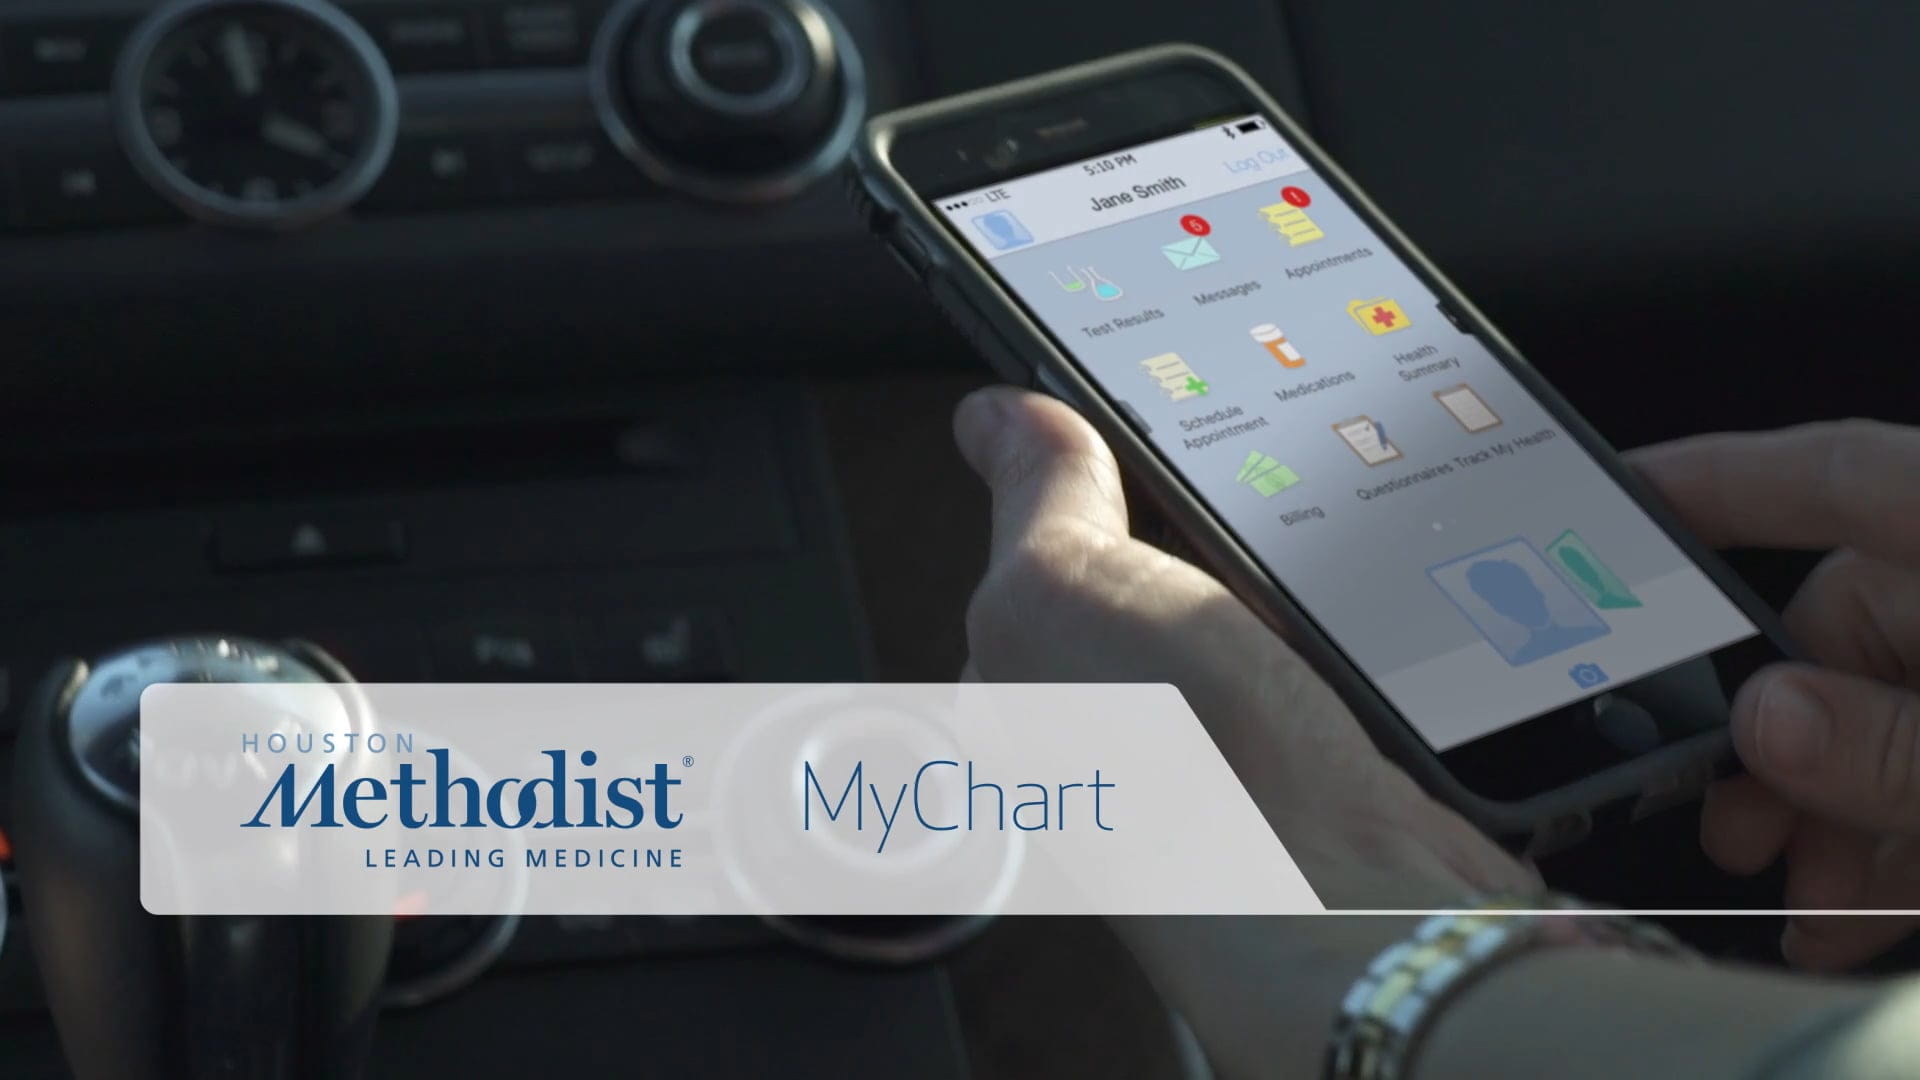 How do you access your medical records using MyChart?